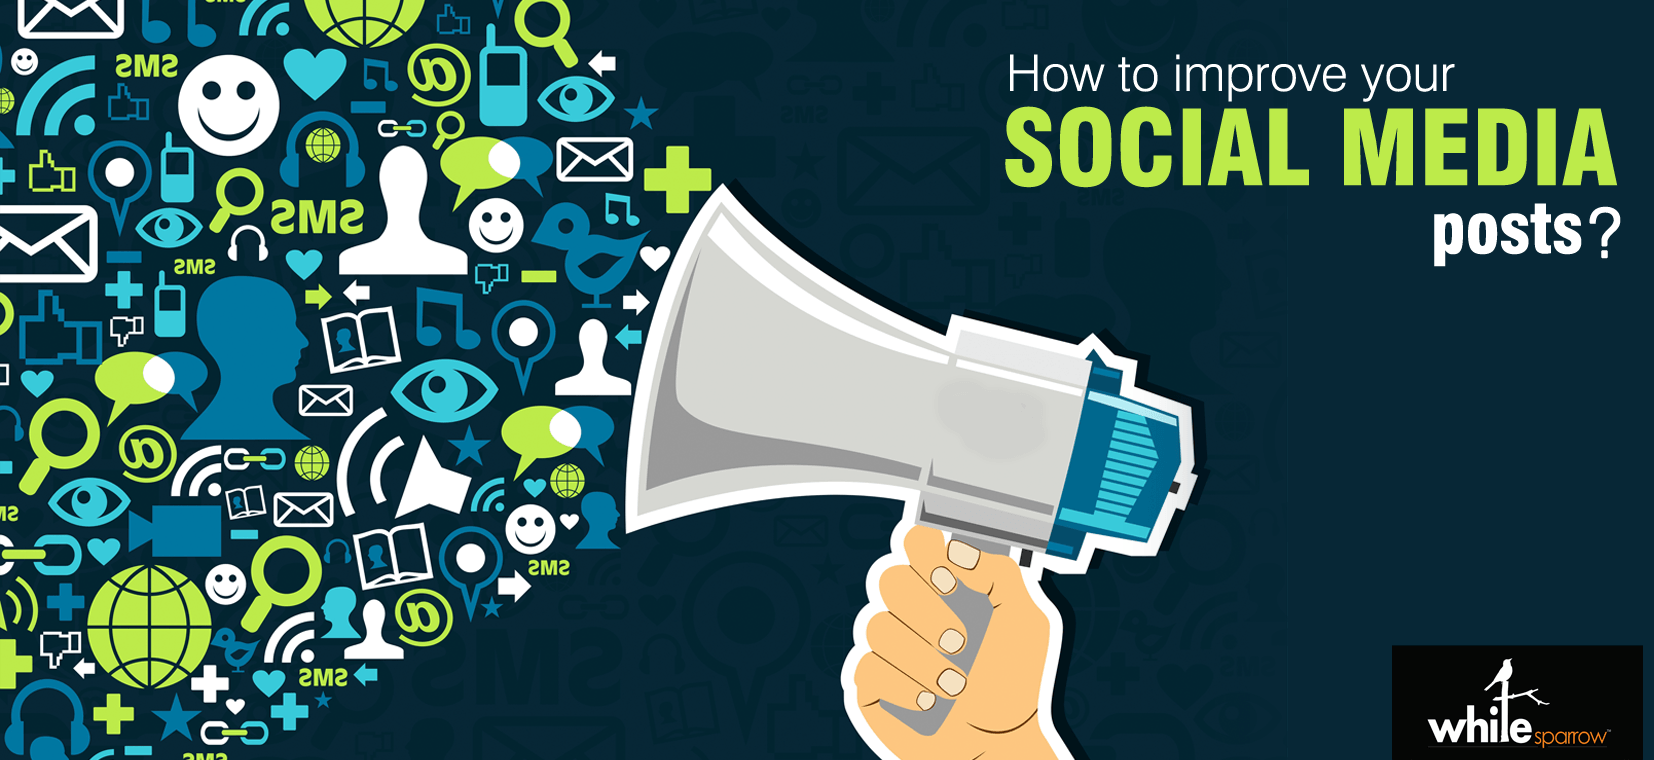 Tips to improve your social media posts